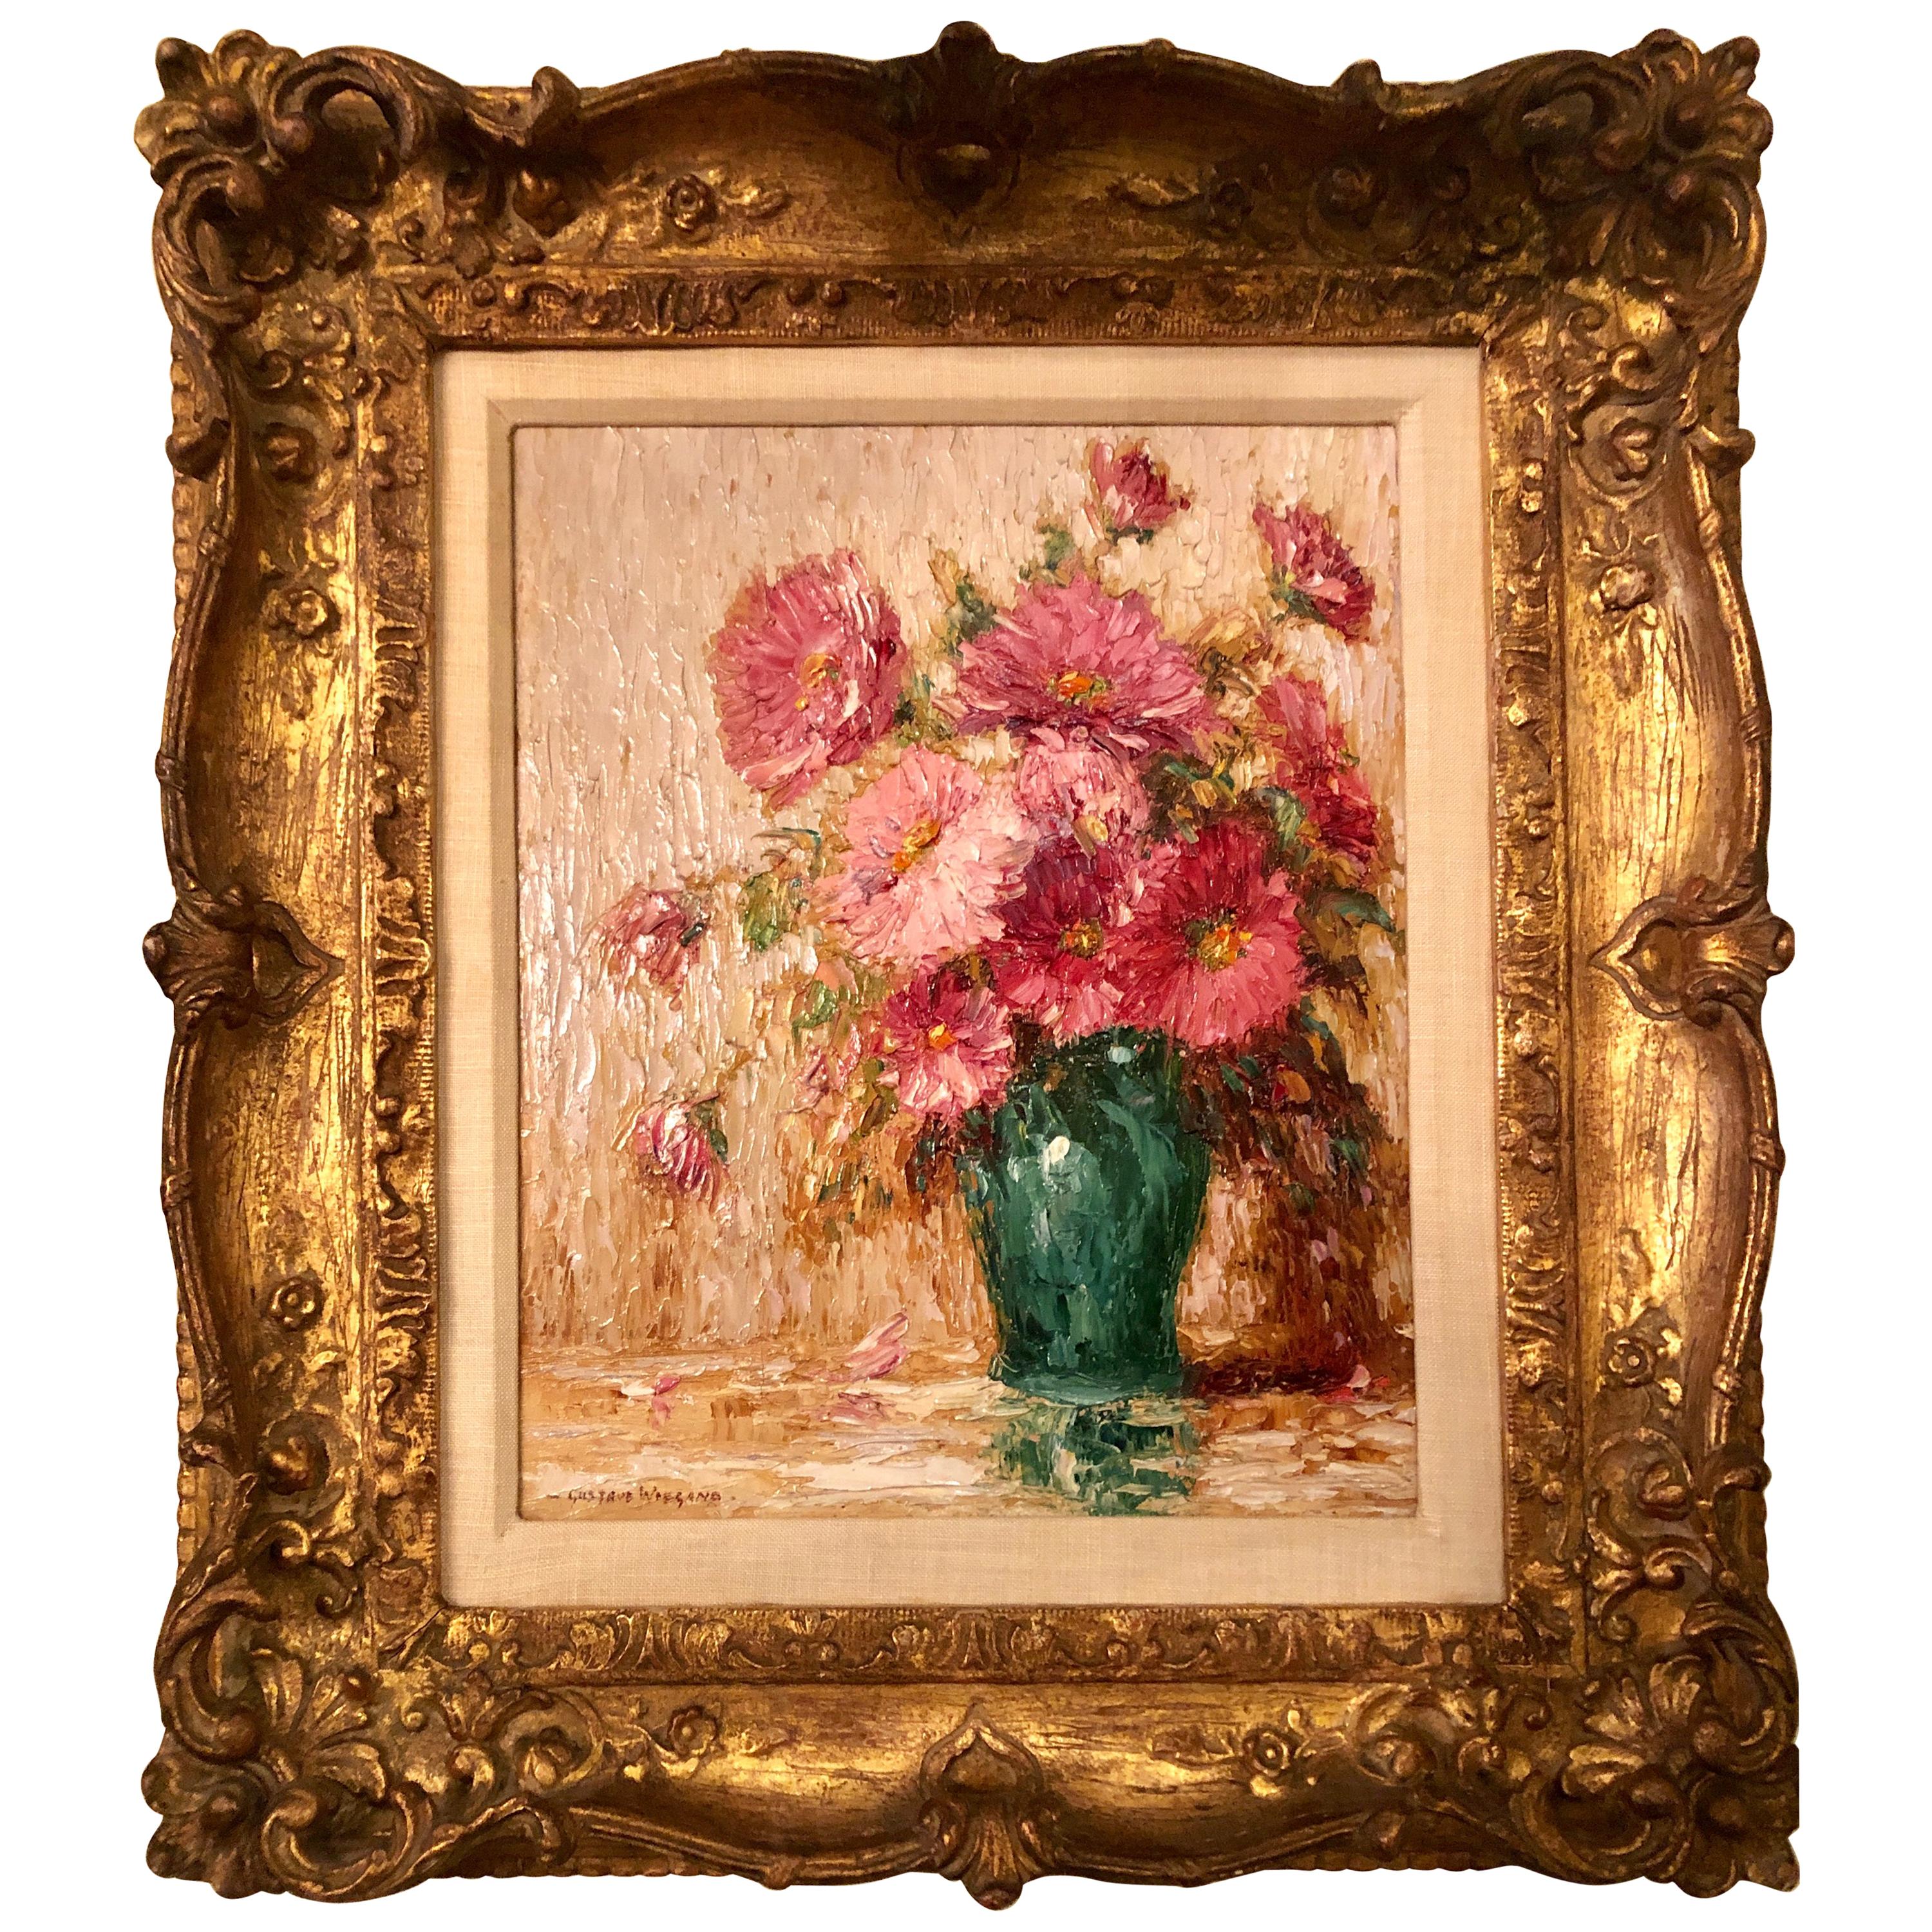 Oil on Canvas Gustave Weigand German 1860-1930 Signed Floral Still Life